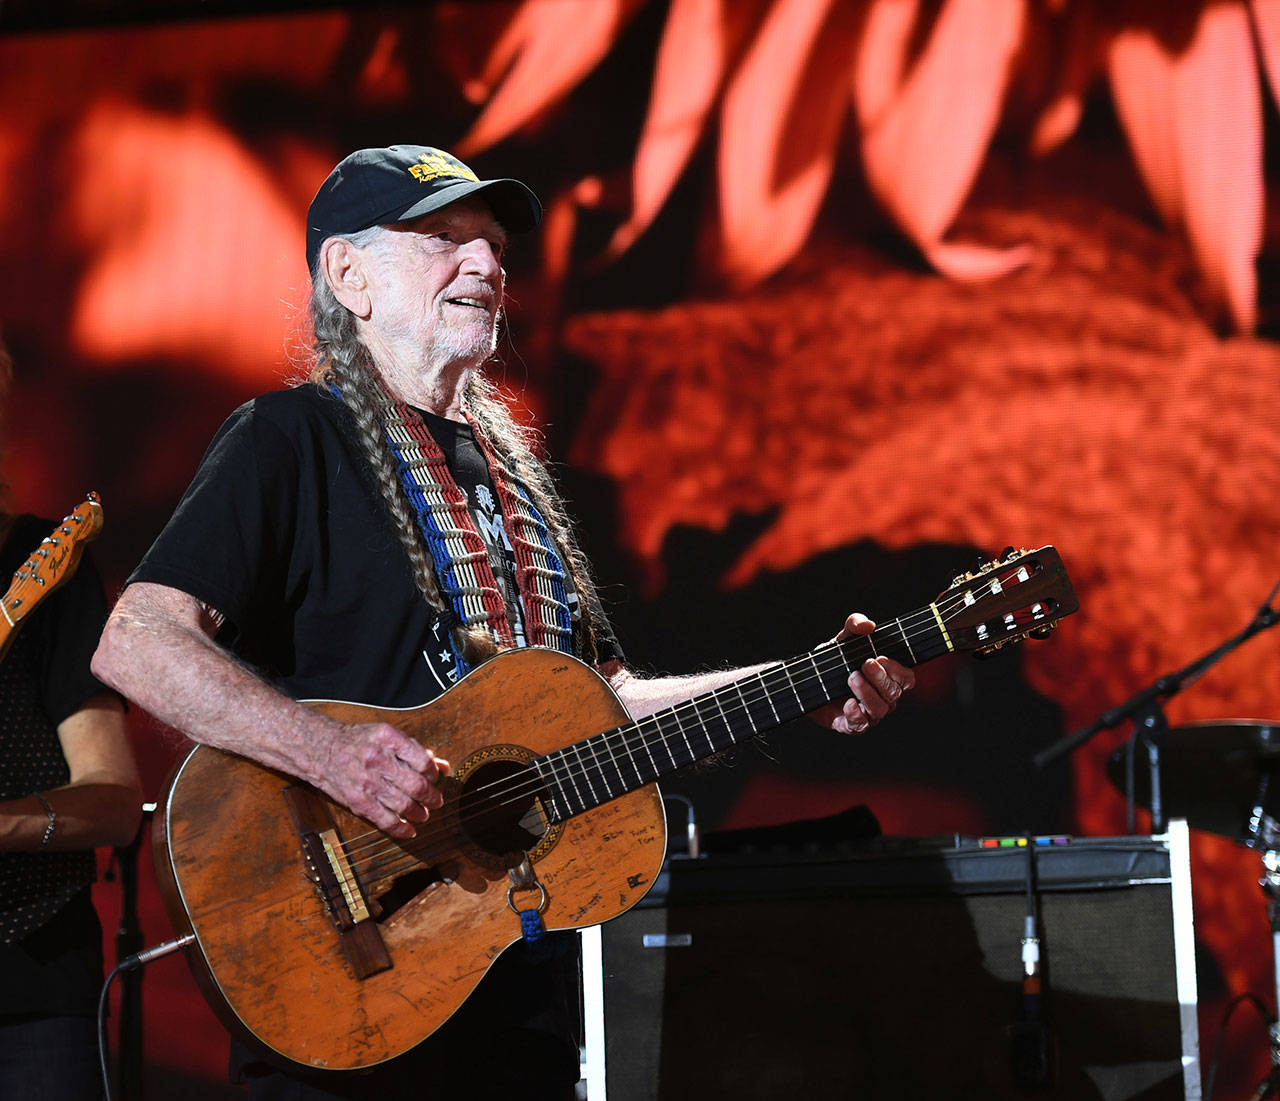 Willie Nelson entertains the crowd at Farm Aid 2017 In Burgettstoen, Pa.. Nelson will play at a rally for Texas senatorial candidate Beto O’Rourke on Sept. 29. (Jeff Moore/Zuma Press/TNS)